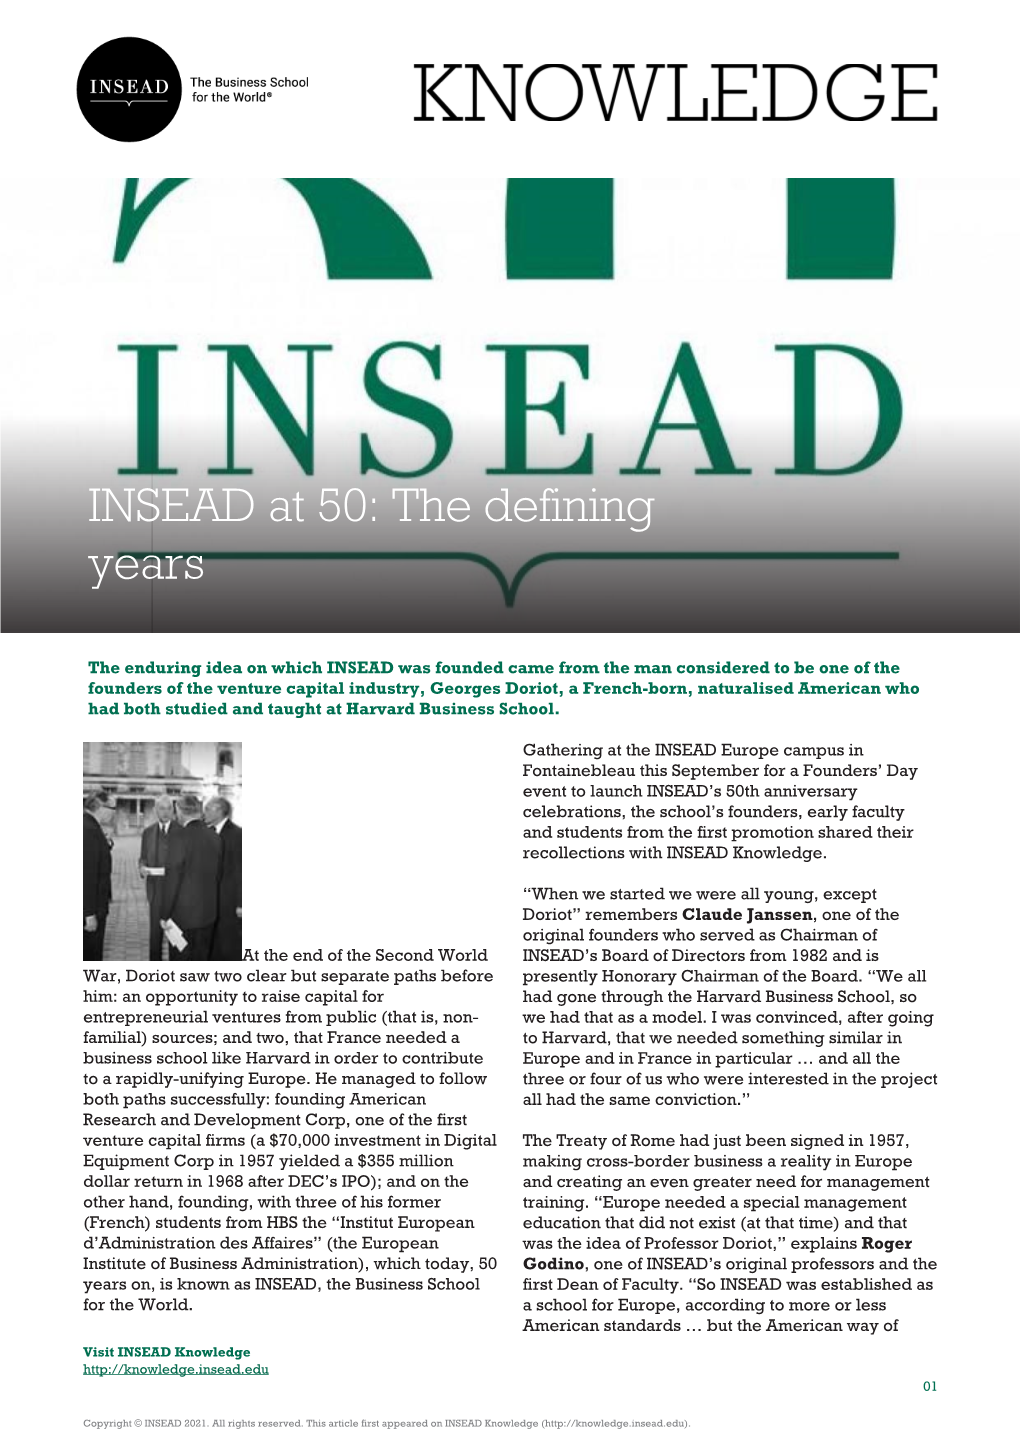 INSEAD at 50: the Defining Years